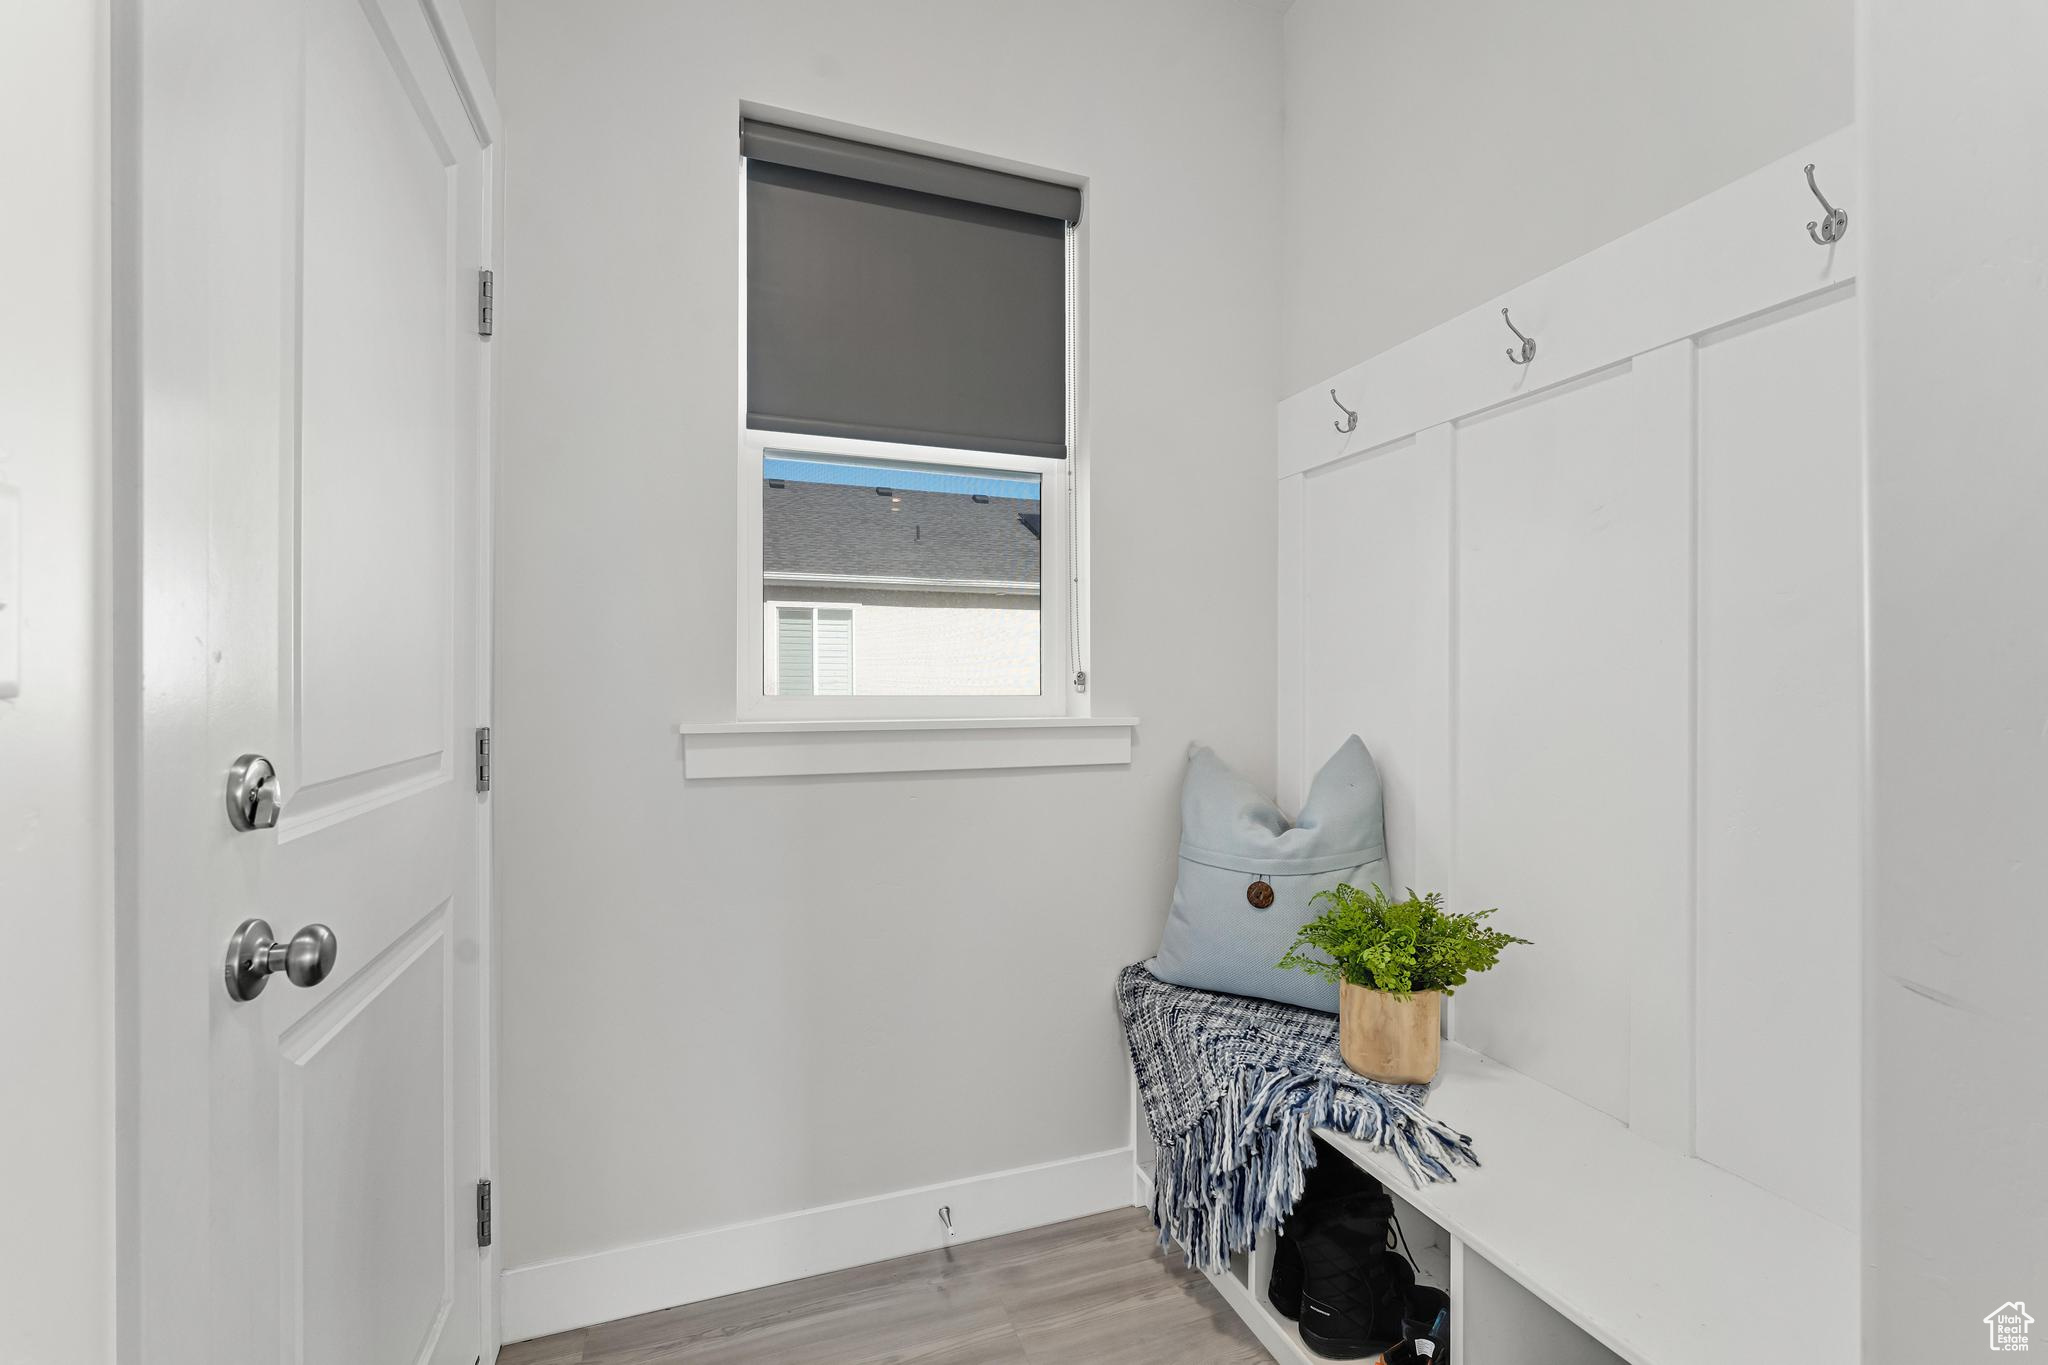 Mud Room with Built-In Shelving and Hooks